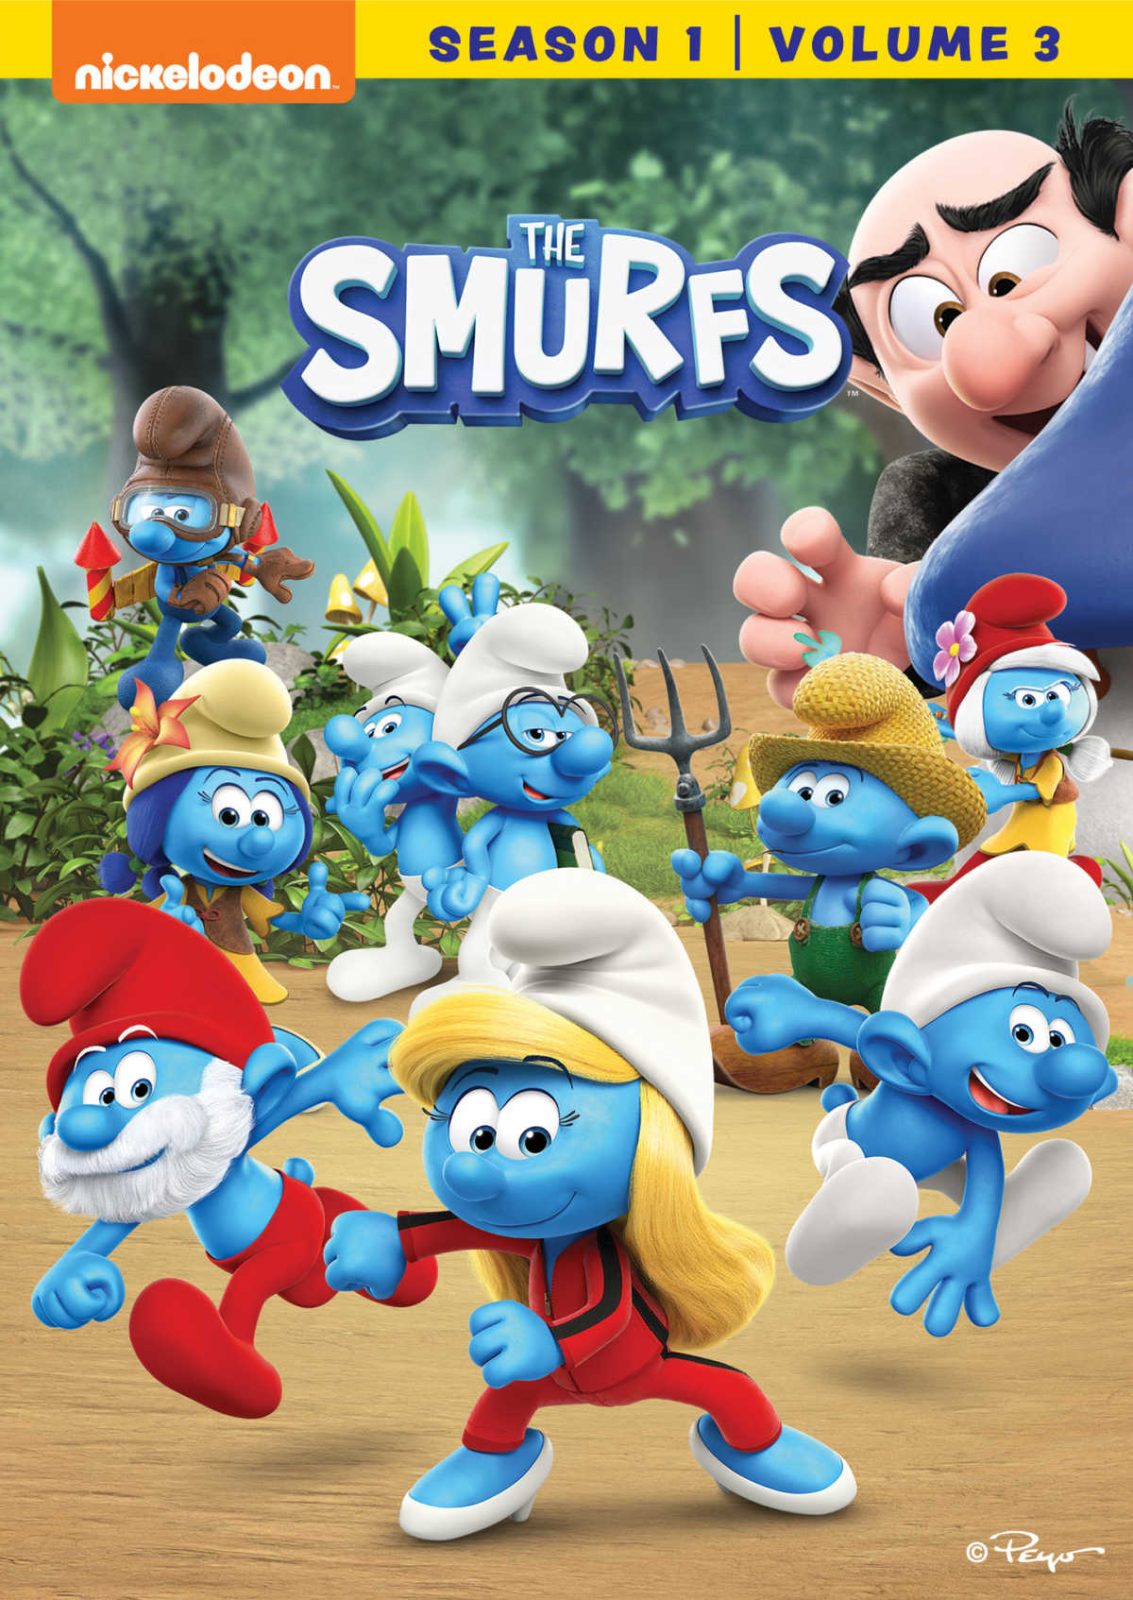 Kids will love the new The Smurfs Season 1 Volume 3 DVD, since it is filled with fun, entertainment and a whole lot of heart. 